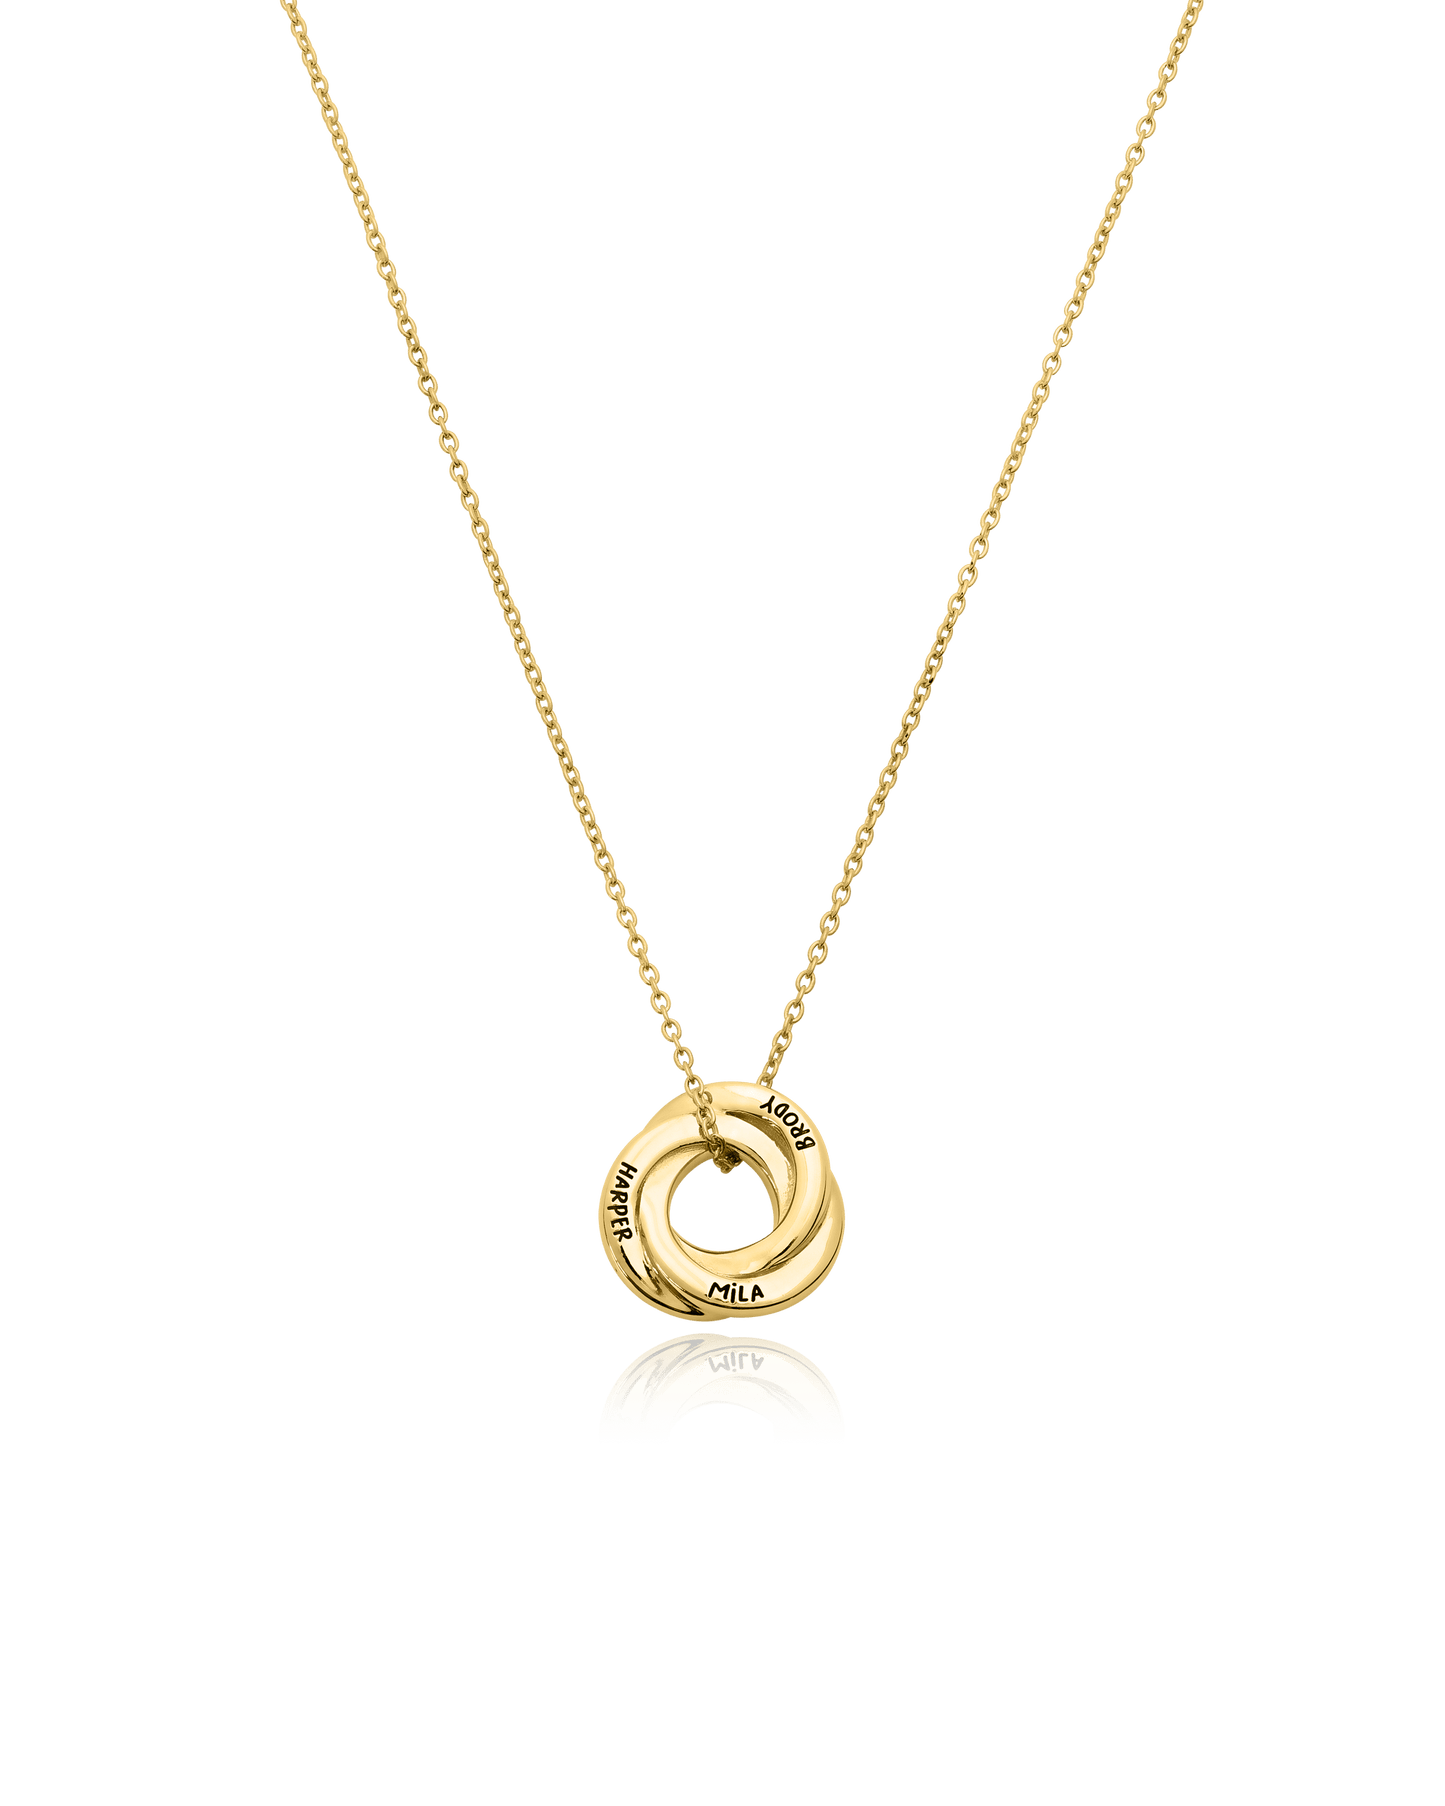 Russian Ring Necklace - 18K Rose Vermeil Necklaces magal-dev 